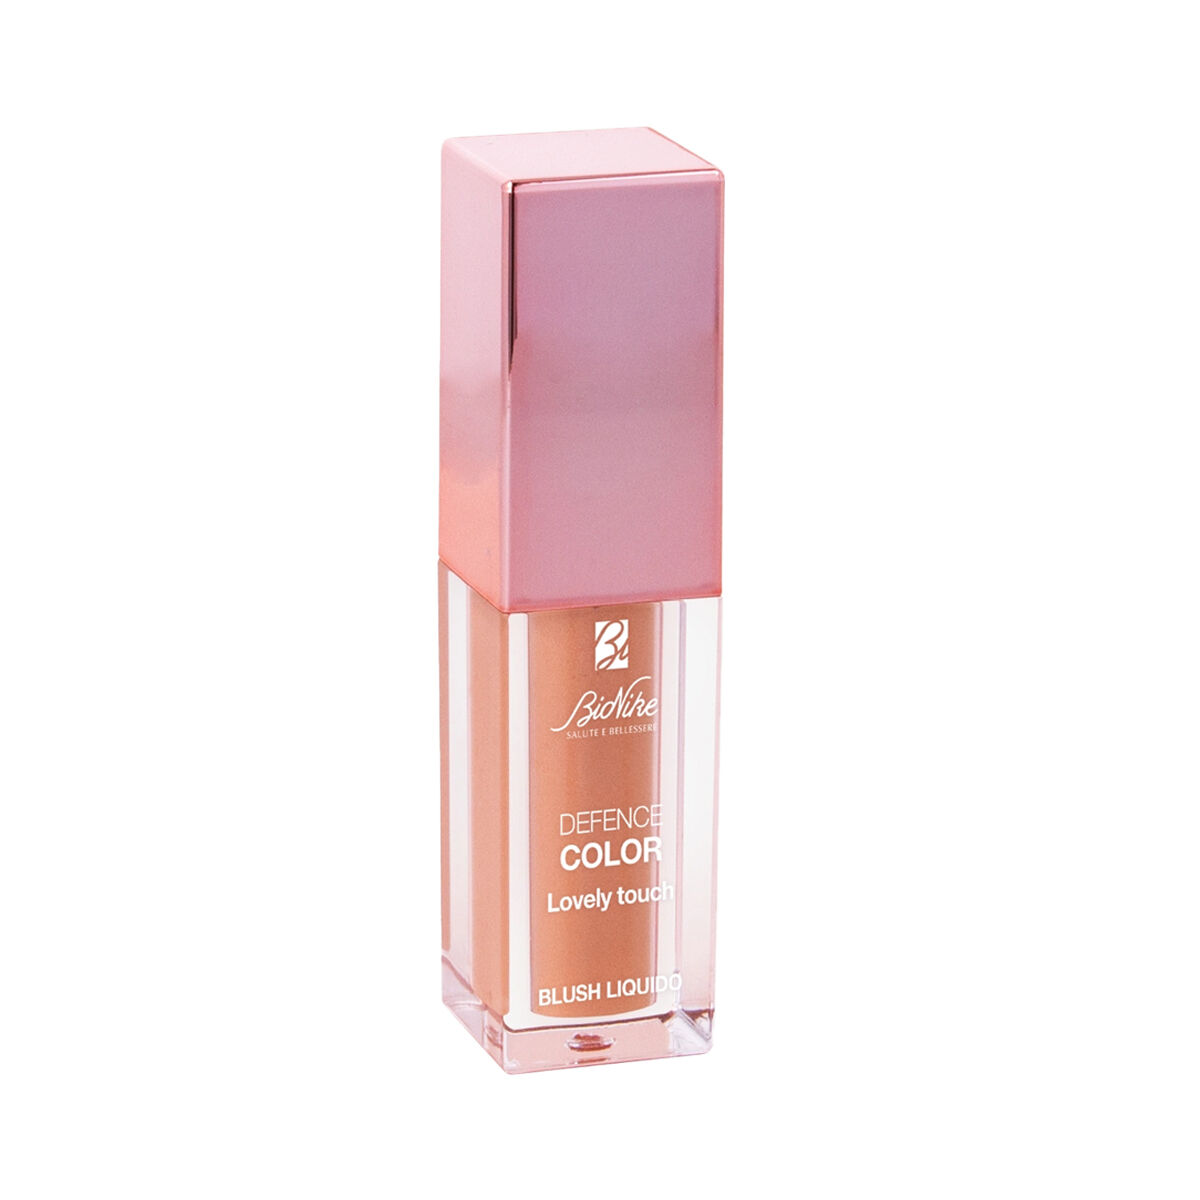 Bionike Defence Color Lovely Touch Blush Liquido 402 Peche